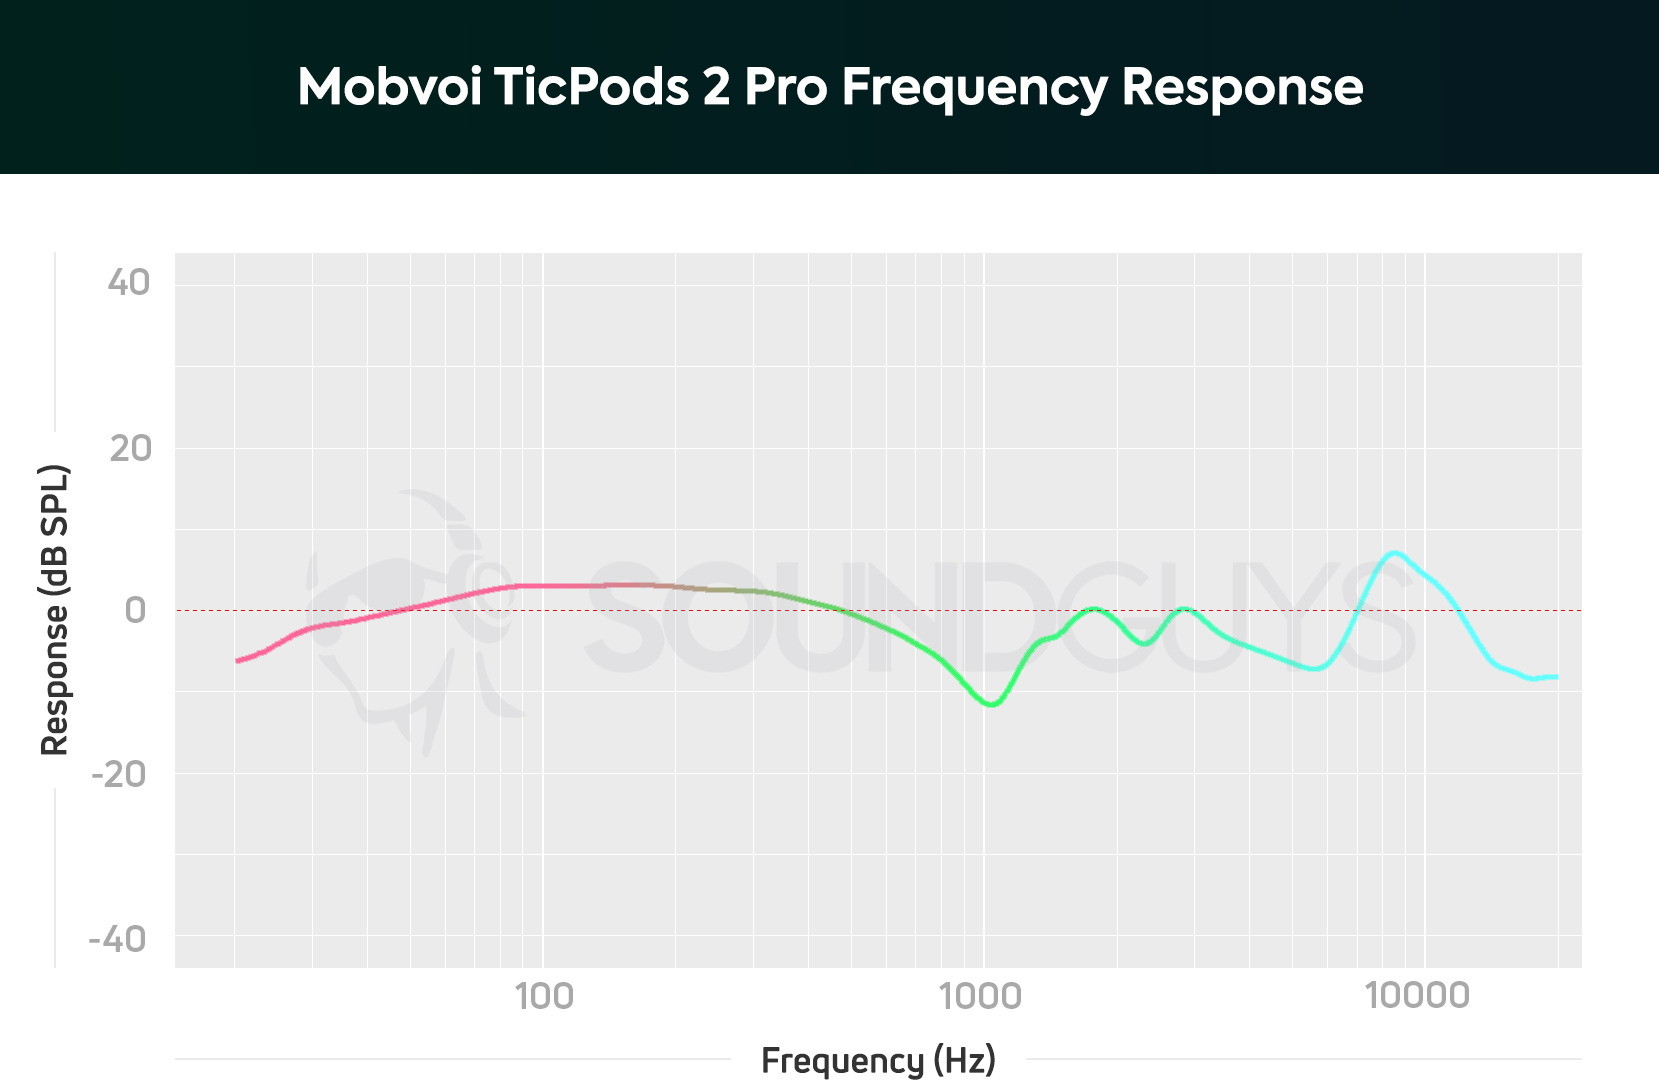 A chart depicting the Mobvoi TicPods 2 Pro true wireless earbuds' frequency response.